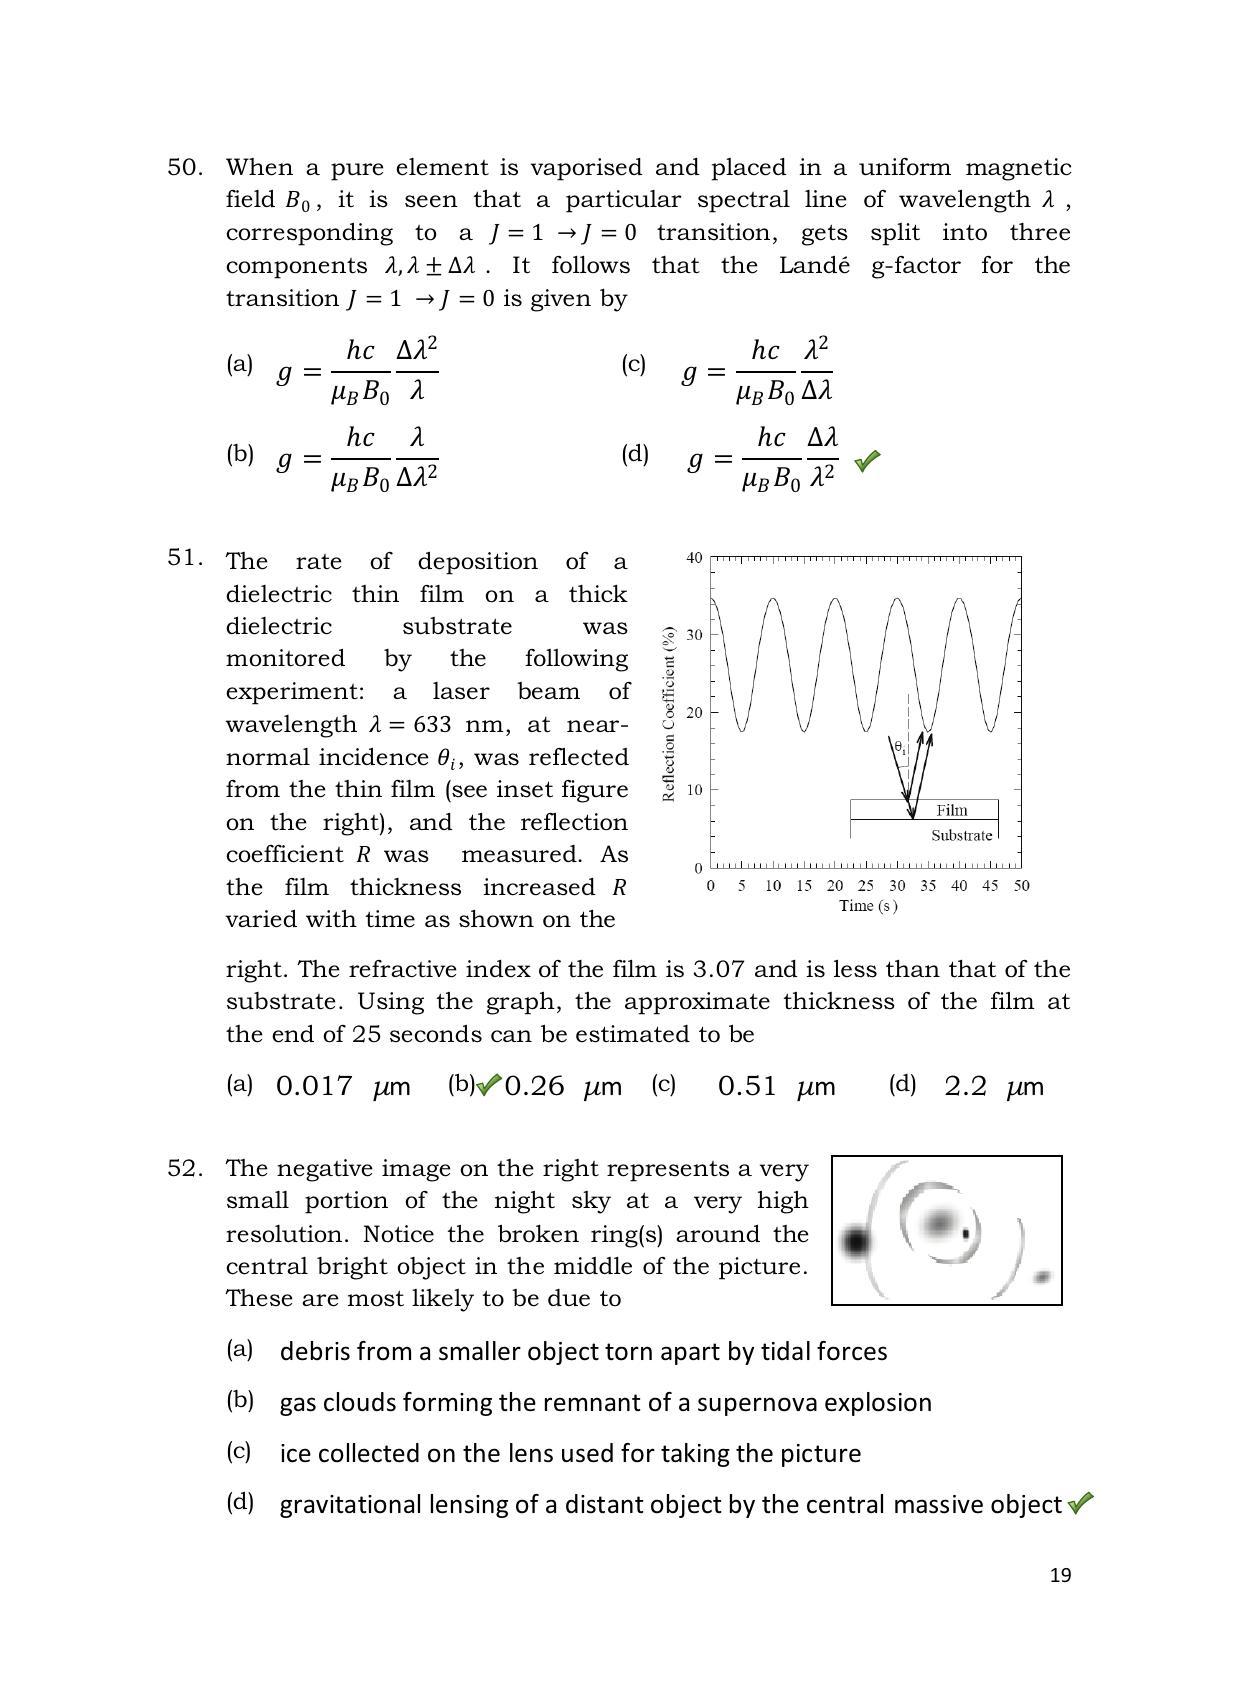 TIFR GS 2013 Physics X Question Paper - Page 20